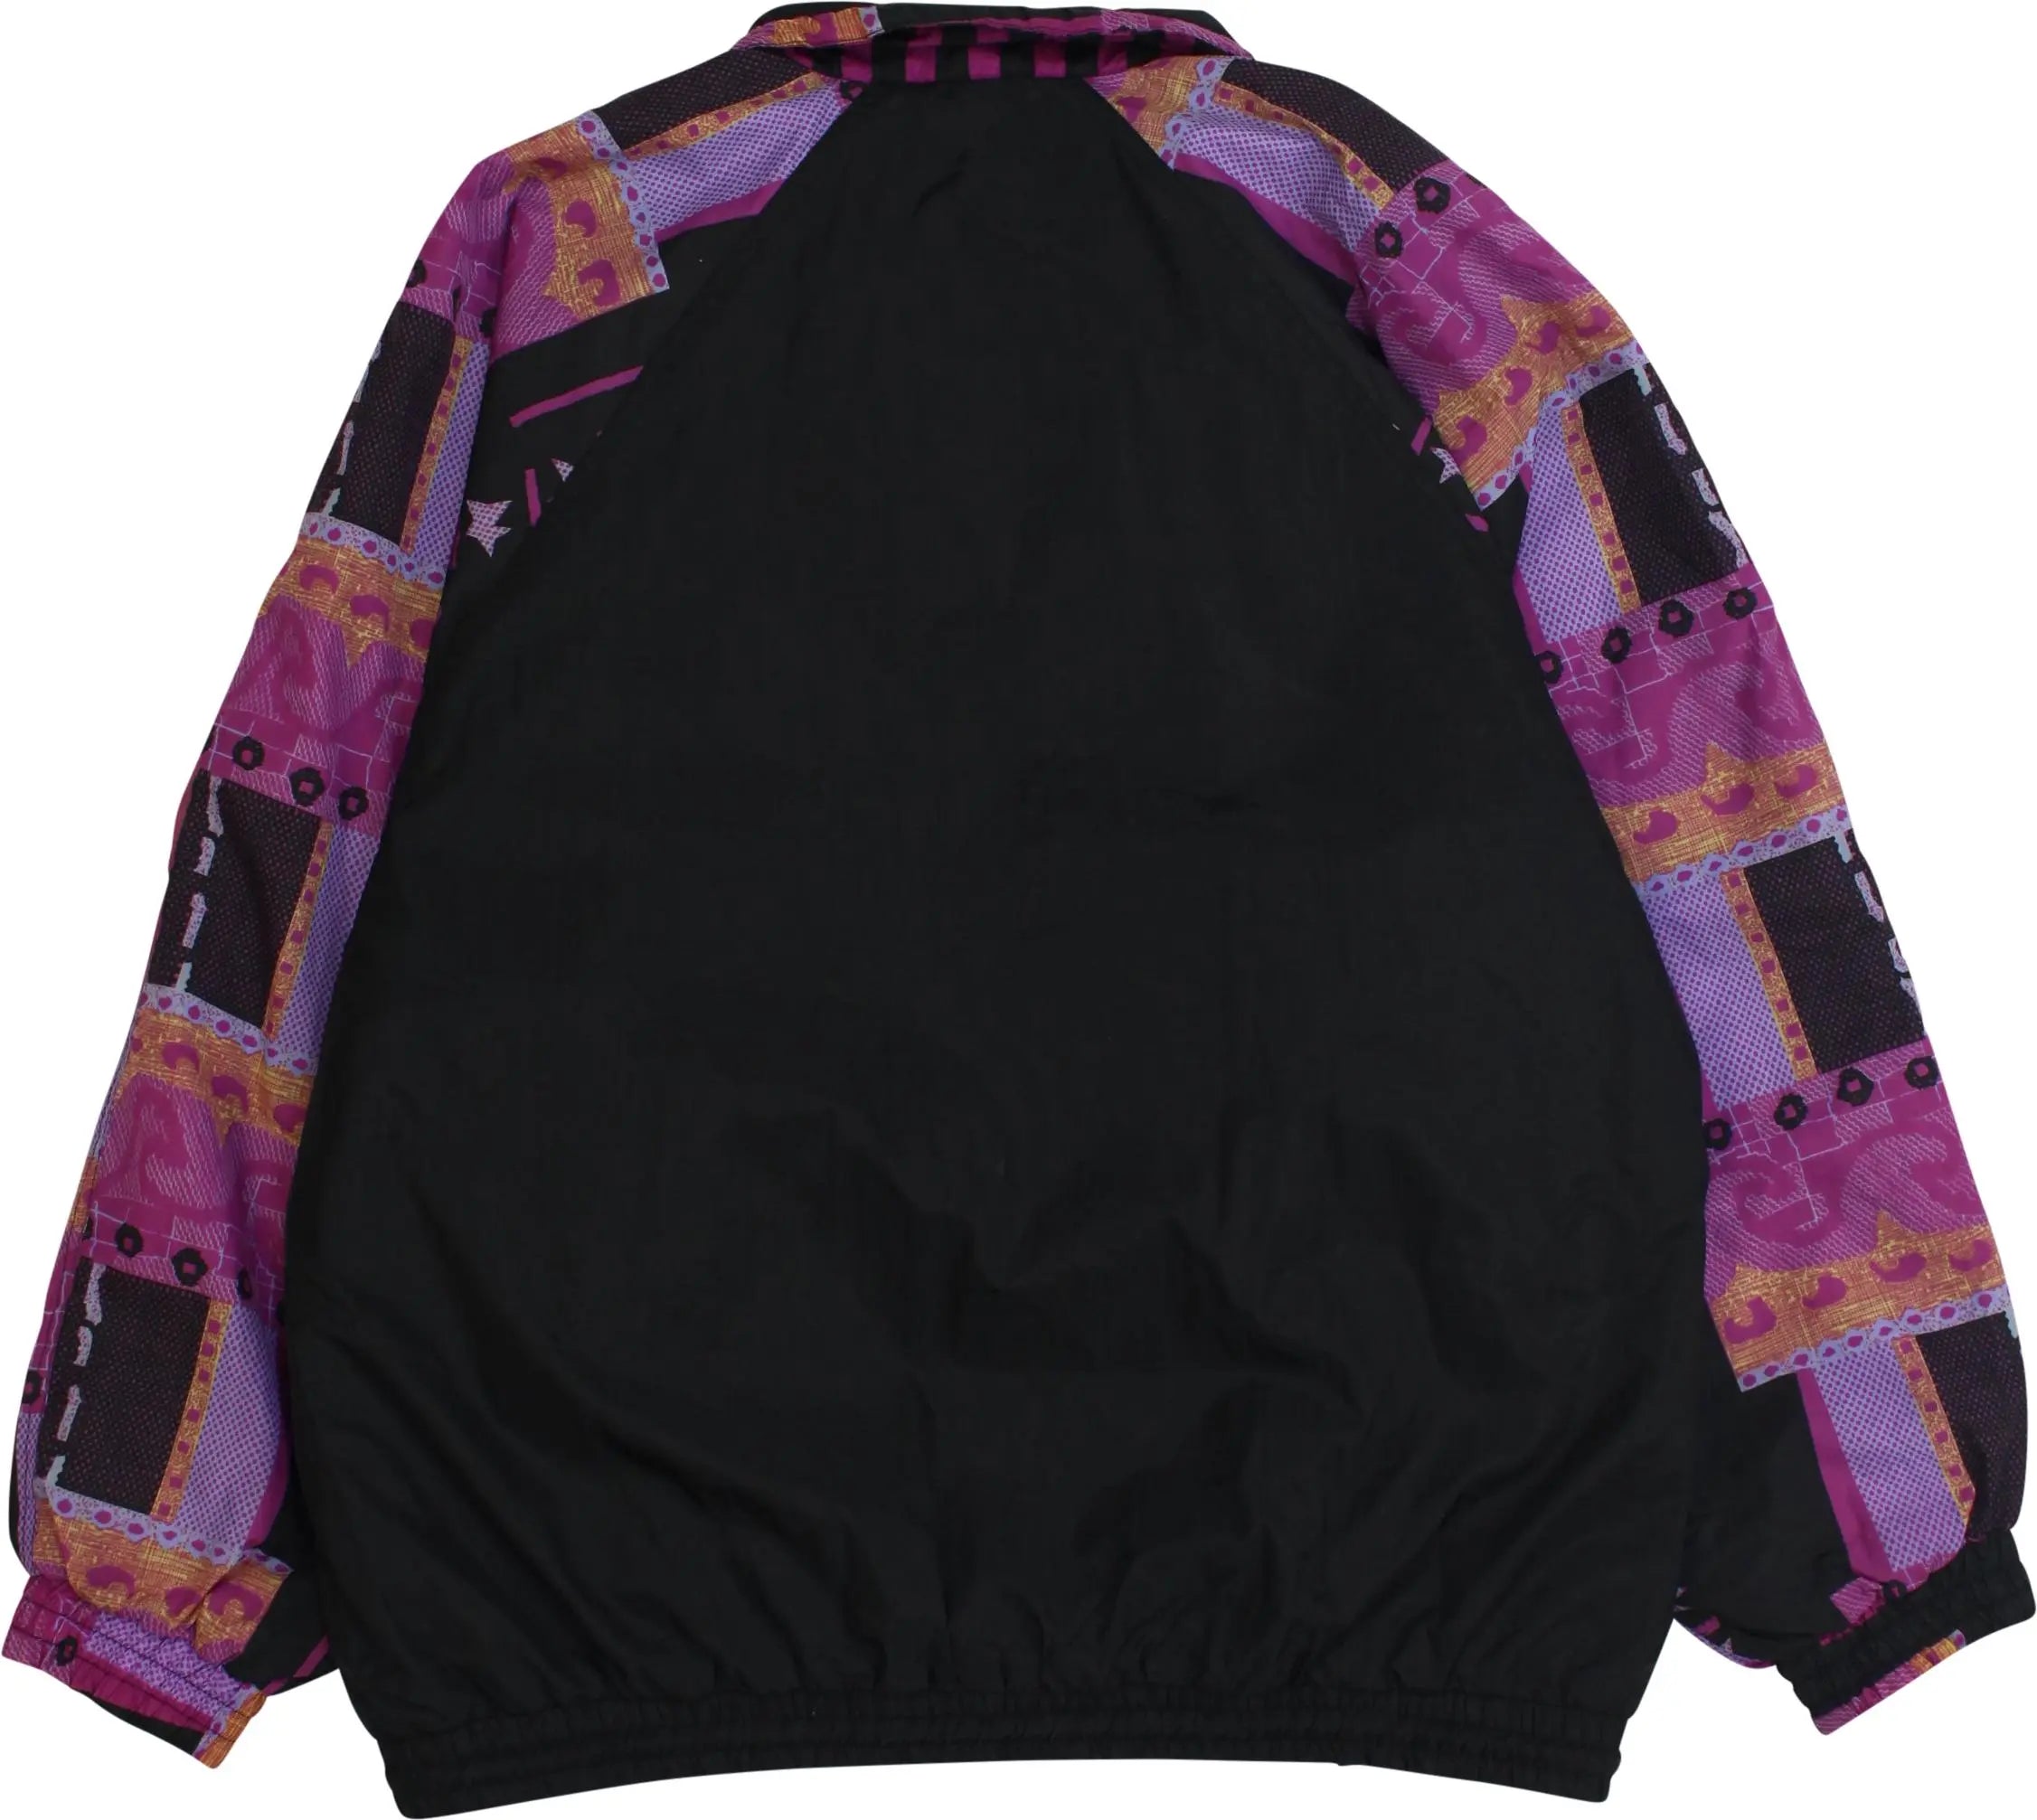 United Lifestyle - 90s Windbreaker with Lining- ThriftTale.com - Vintage and second handclothing